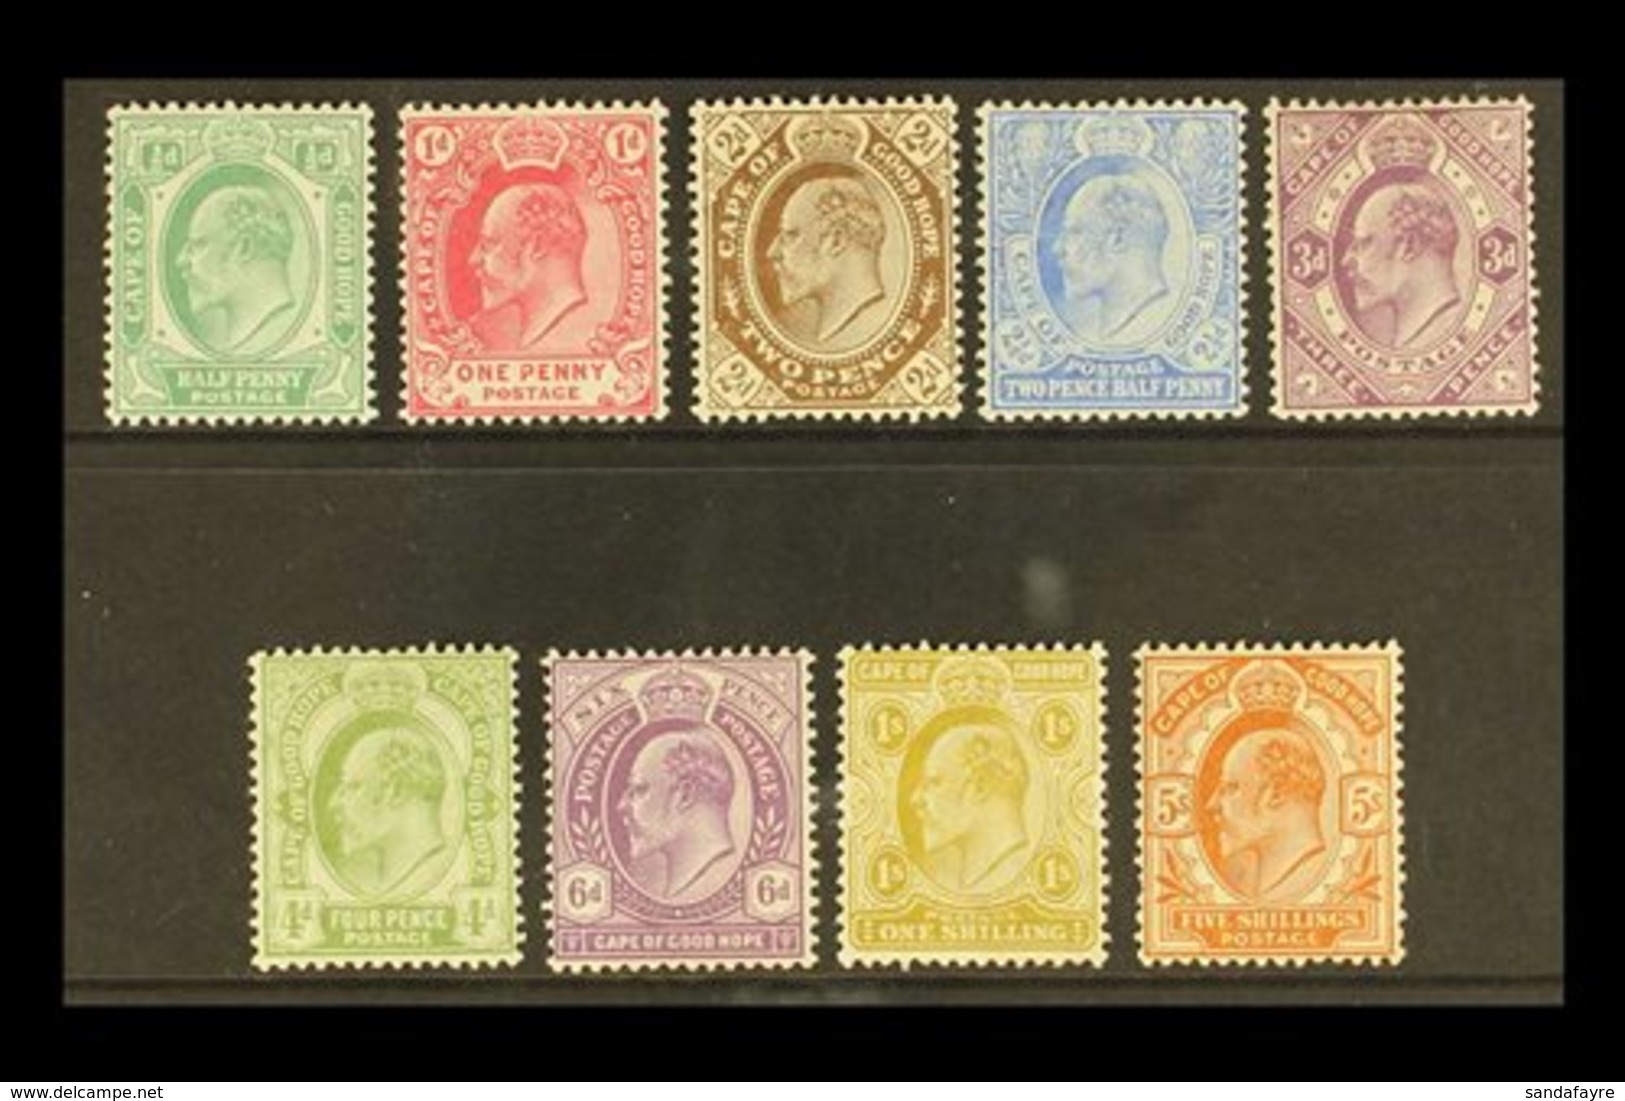 CAPE OF GOOD HOPE  1902-04 KEVII Definitives, Complete Set, SG 70/8, 3d More Heavily Hinged, Others Fine Mint (9 Stamps) - Unclassified